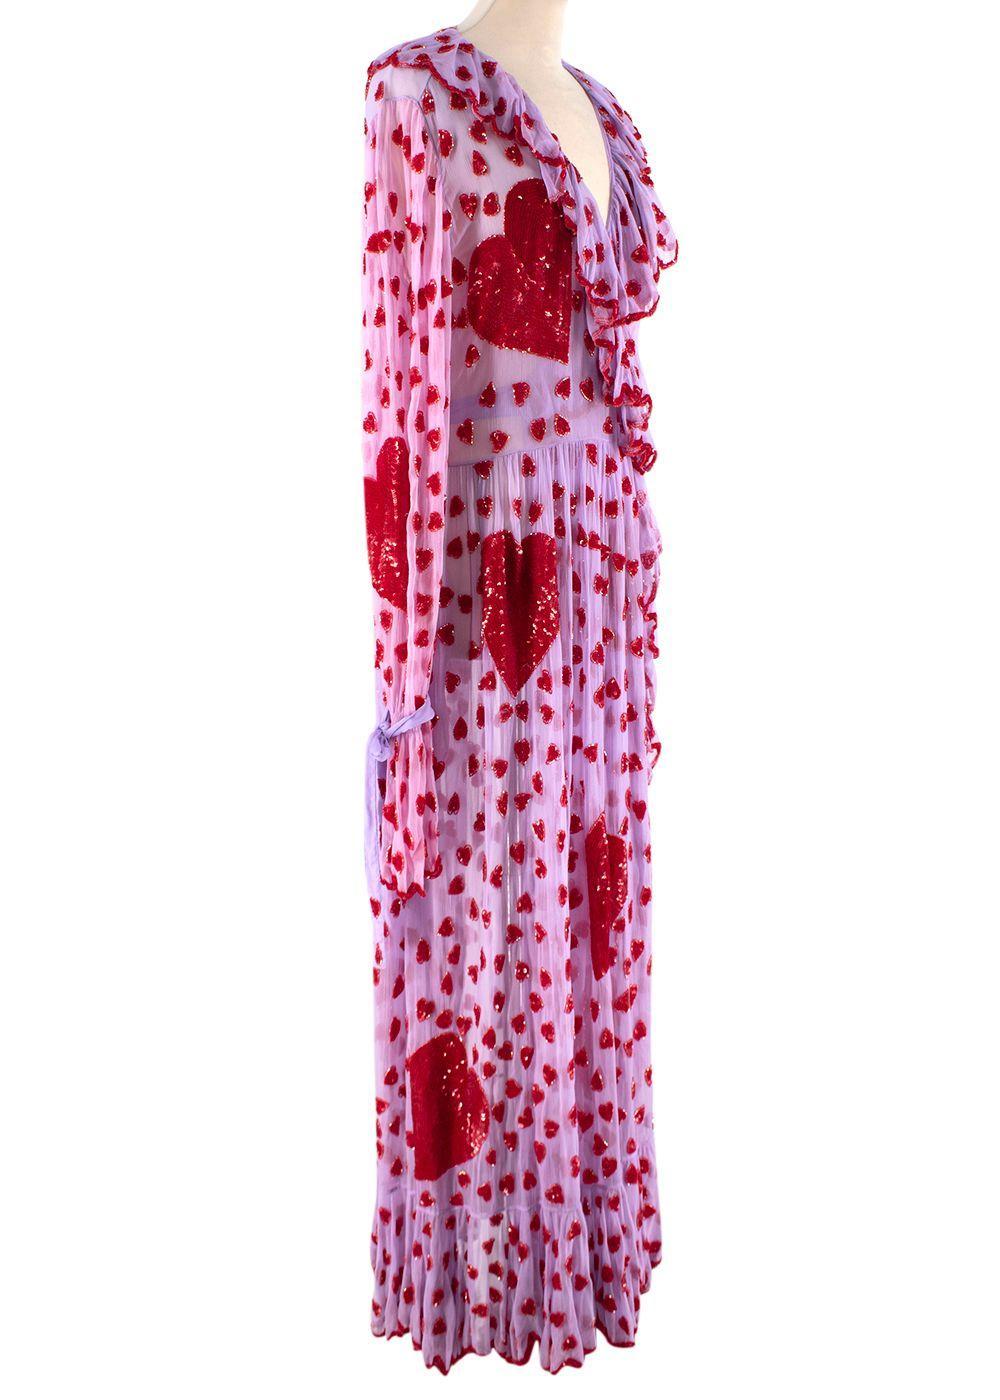 Lilac Chiffon Heart Embellished Wrap Dress

- Lilac sheer chiffon wrap dress
- Embellished in red heart-shaped sequins and beads
- Ruffled details to the oversized cuffs and collar
- Two side pockets

Materials:
100% Nylon

Made in India
Dry clean